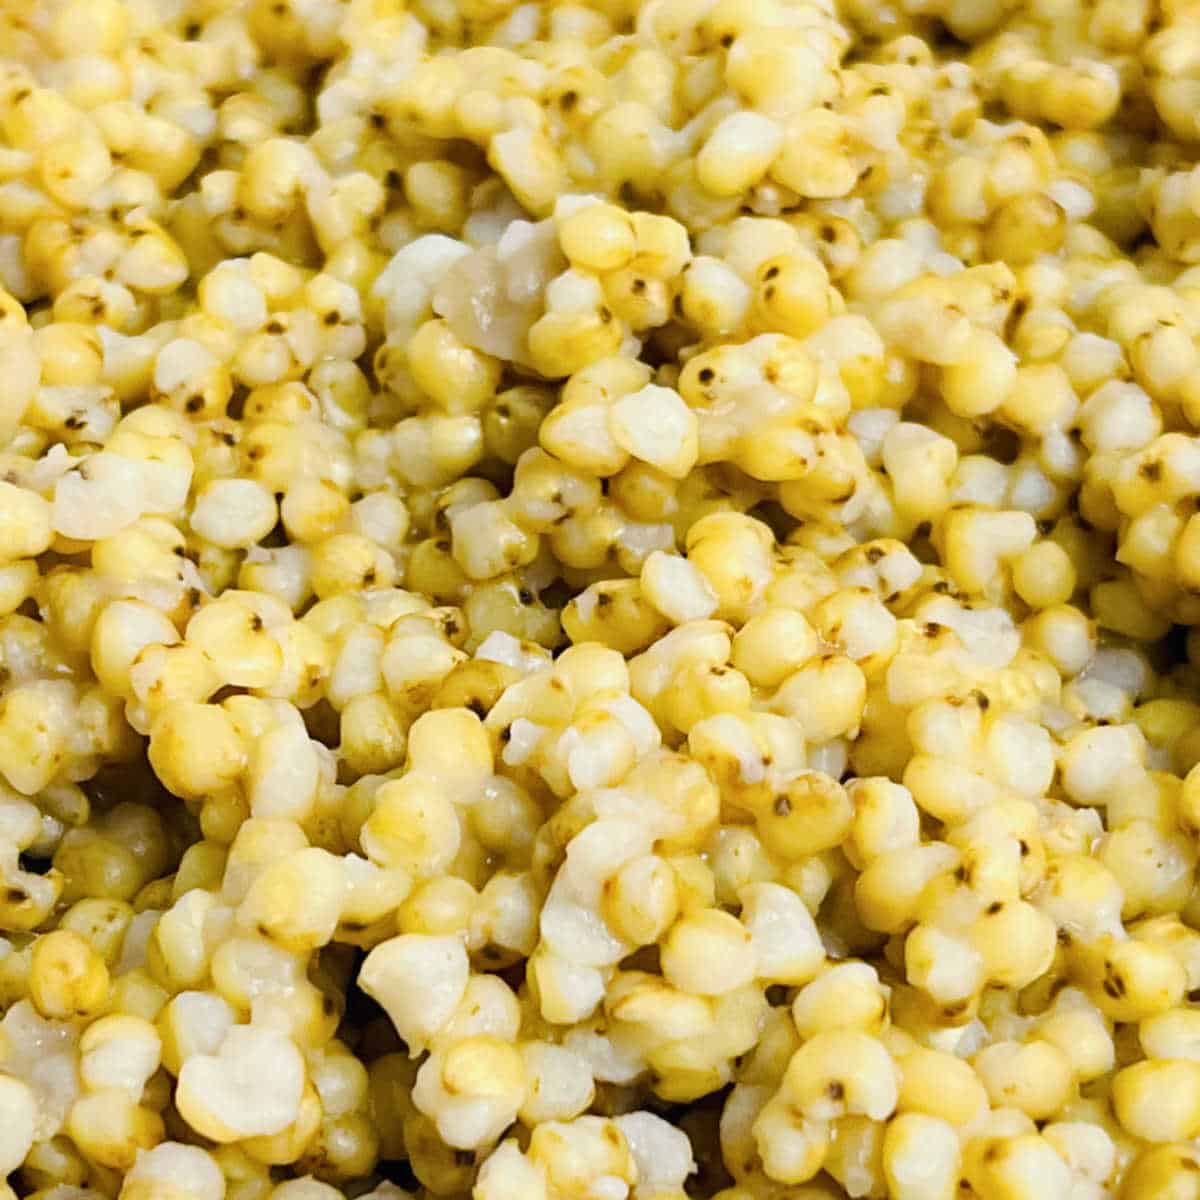 A close up of cooked sorghum to show the correct texture.